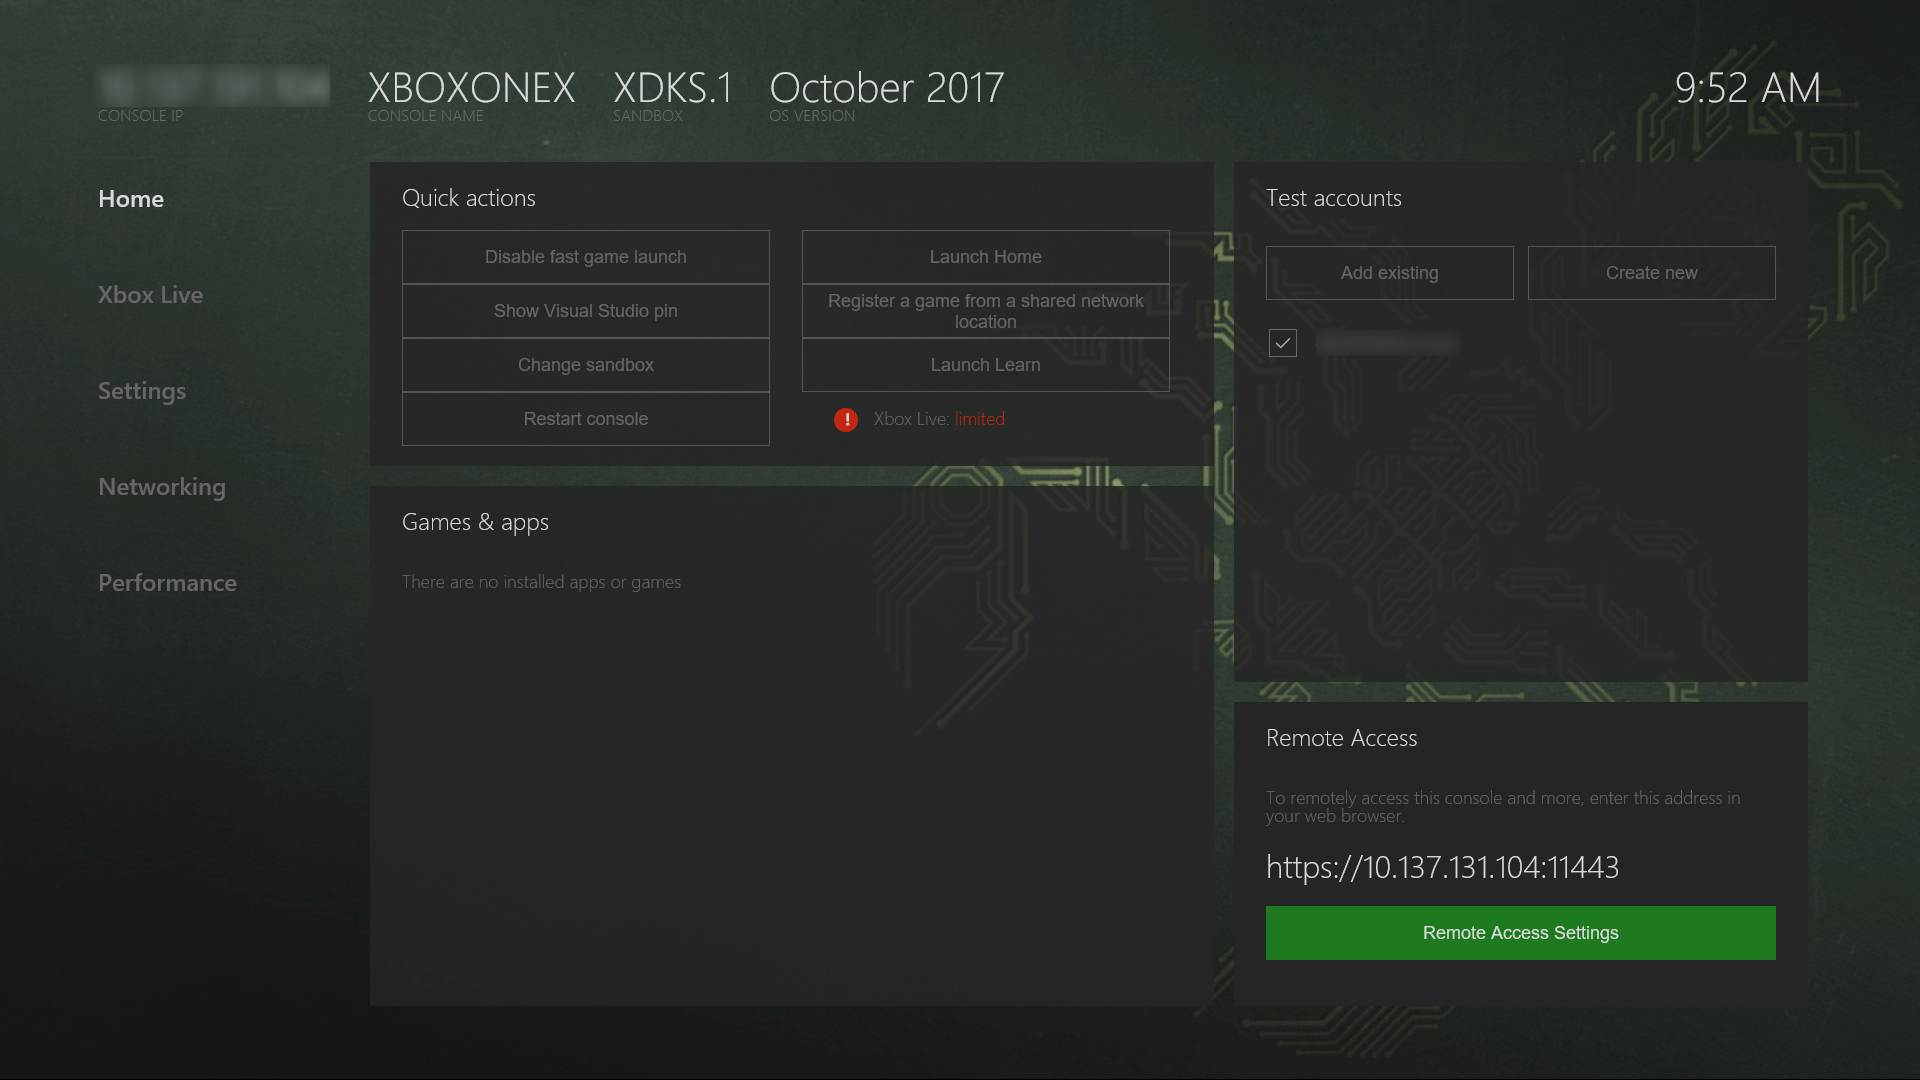 Introduction to Xbox One tools - UWP applications | Microsoft Learn